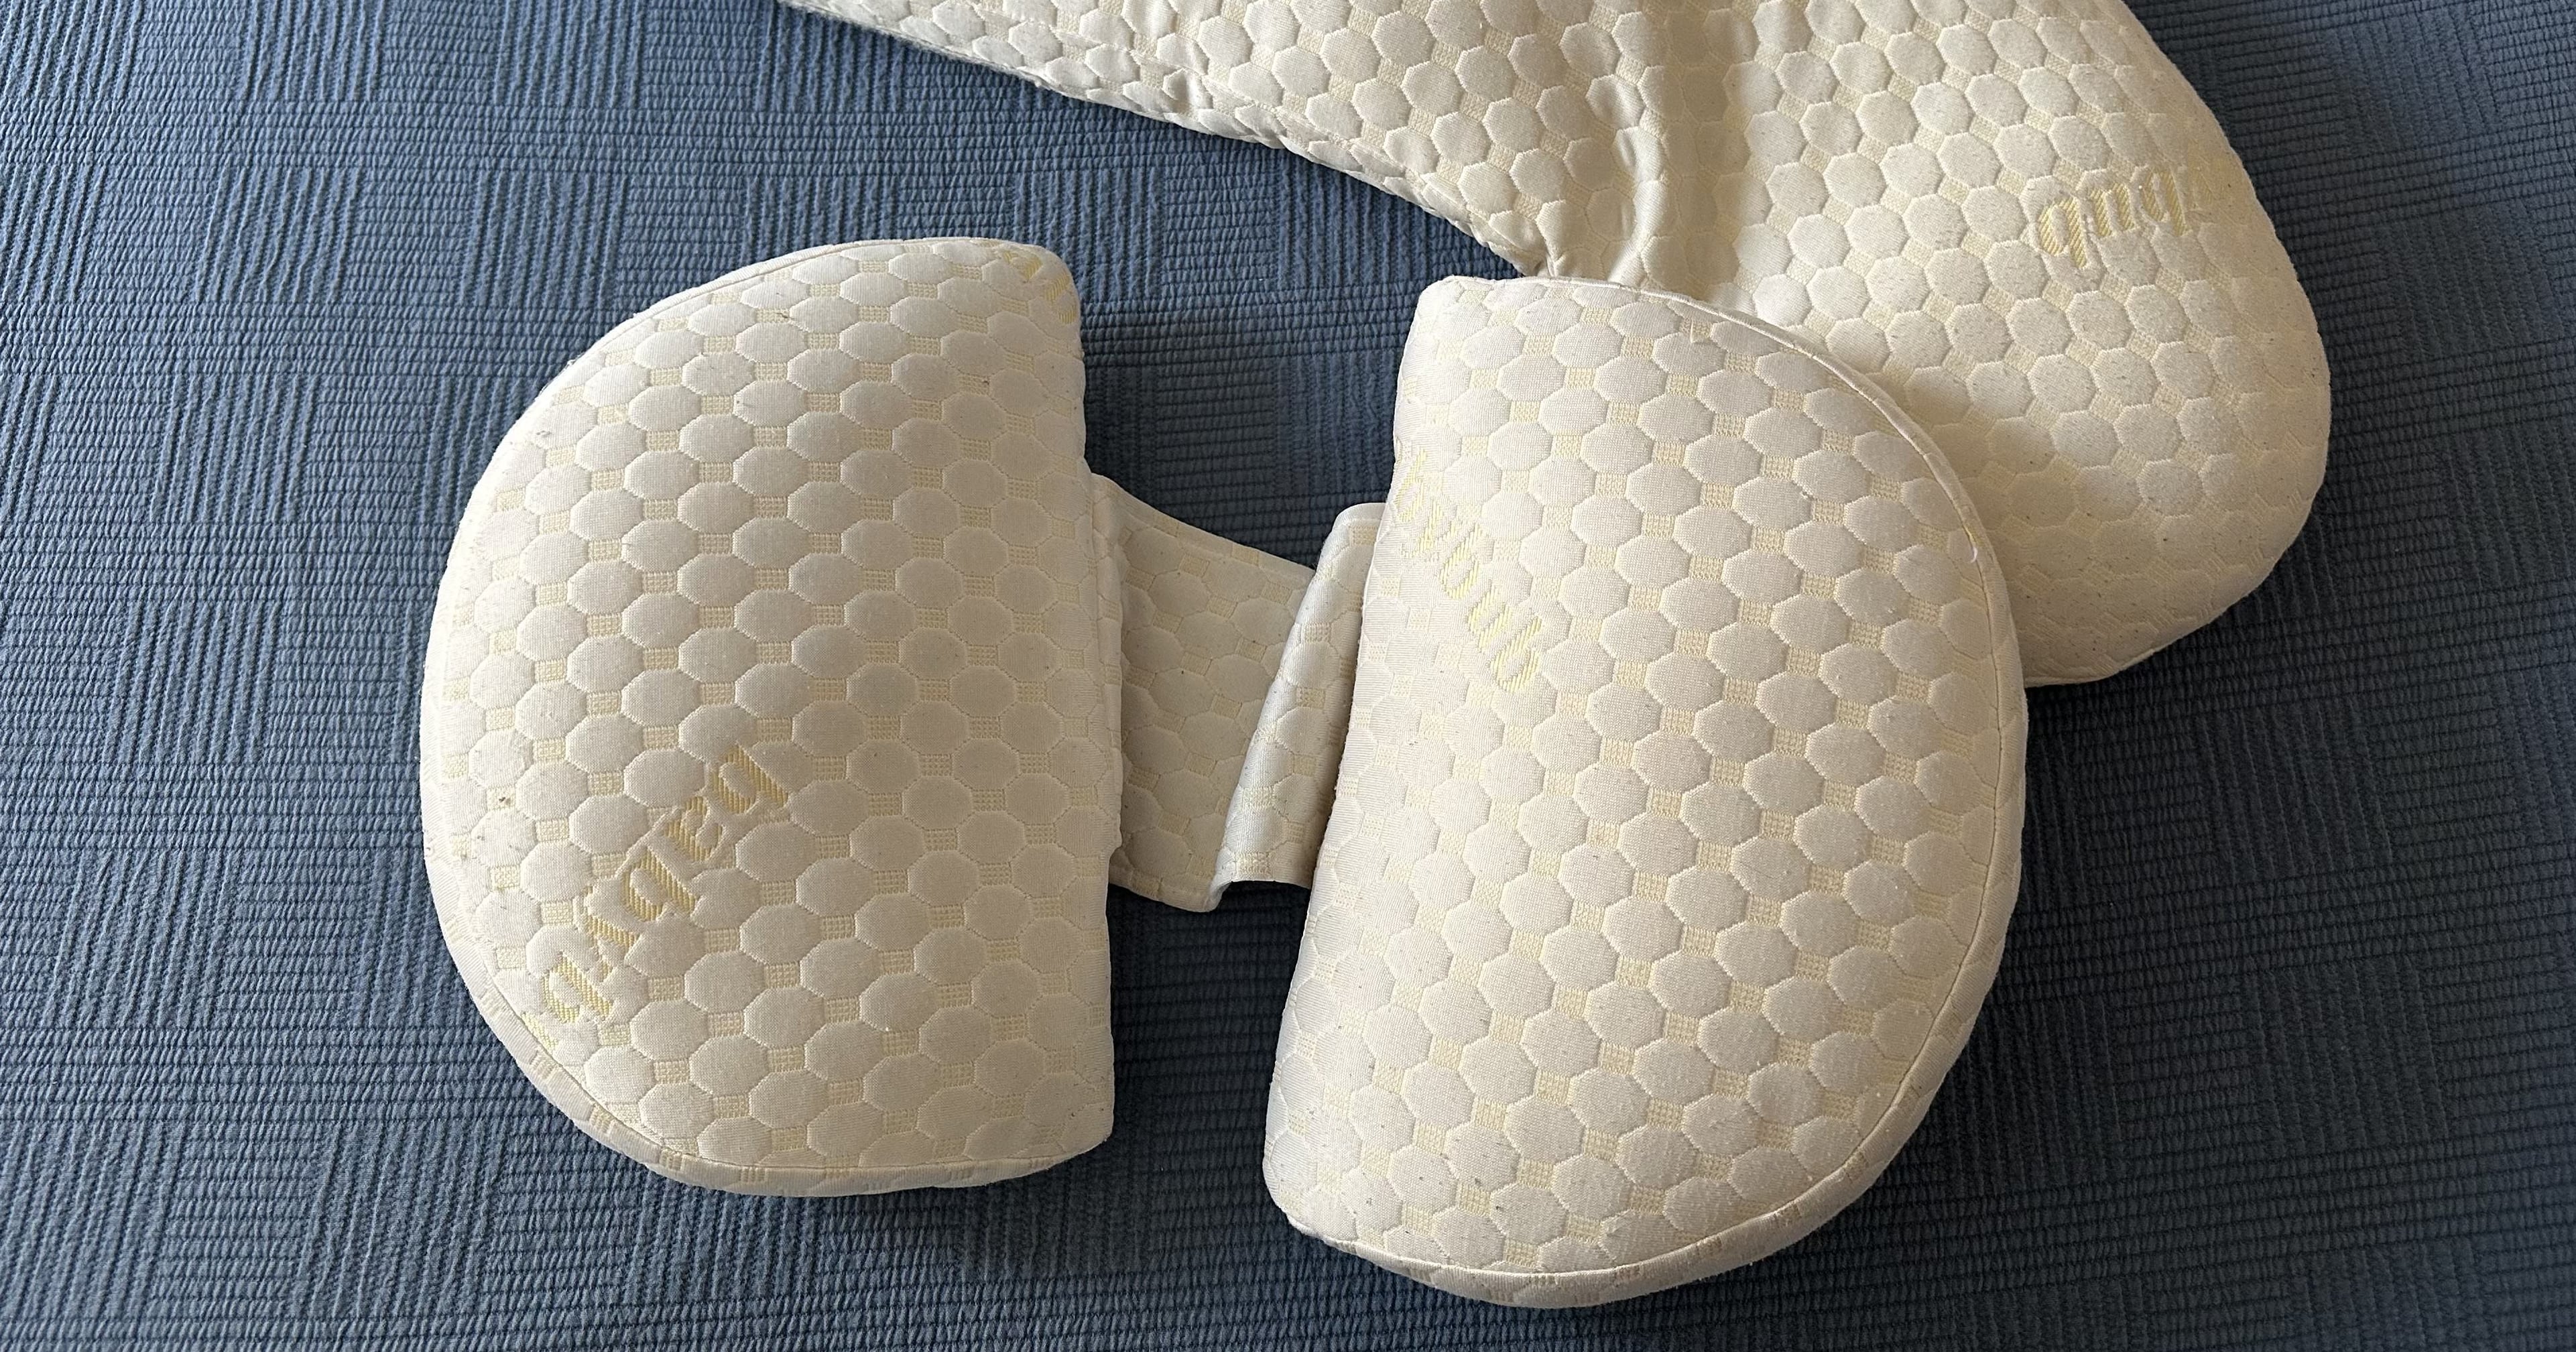 Experiencing Hip Pain While Using Bub's Maternity Pillow™? Here's